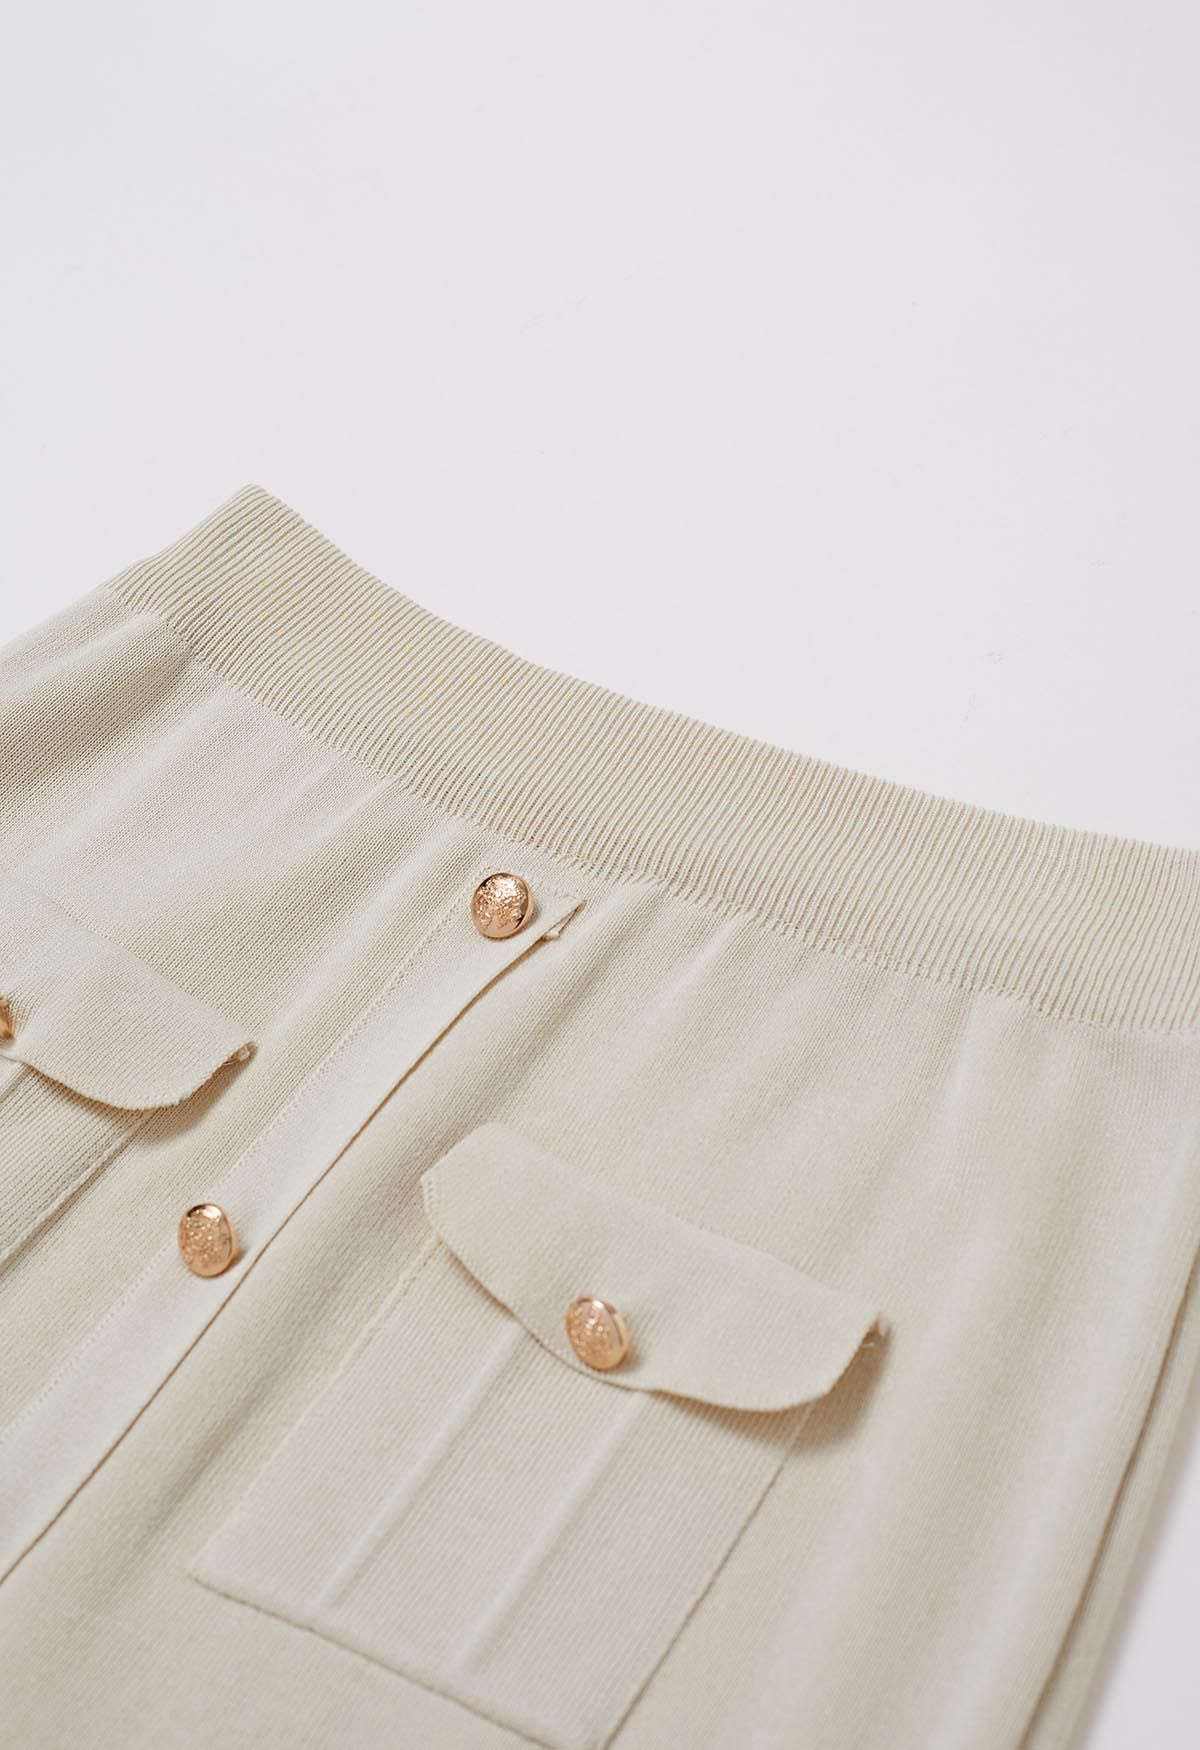 Standout Button Embellished Knit Top and Midi Skirt Set in Ivory